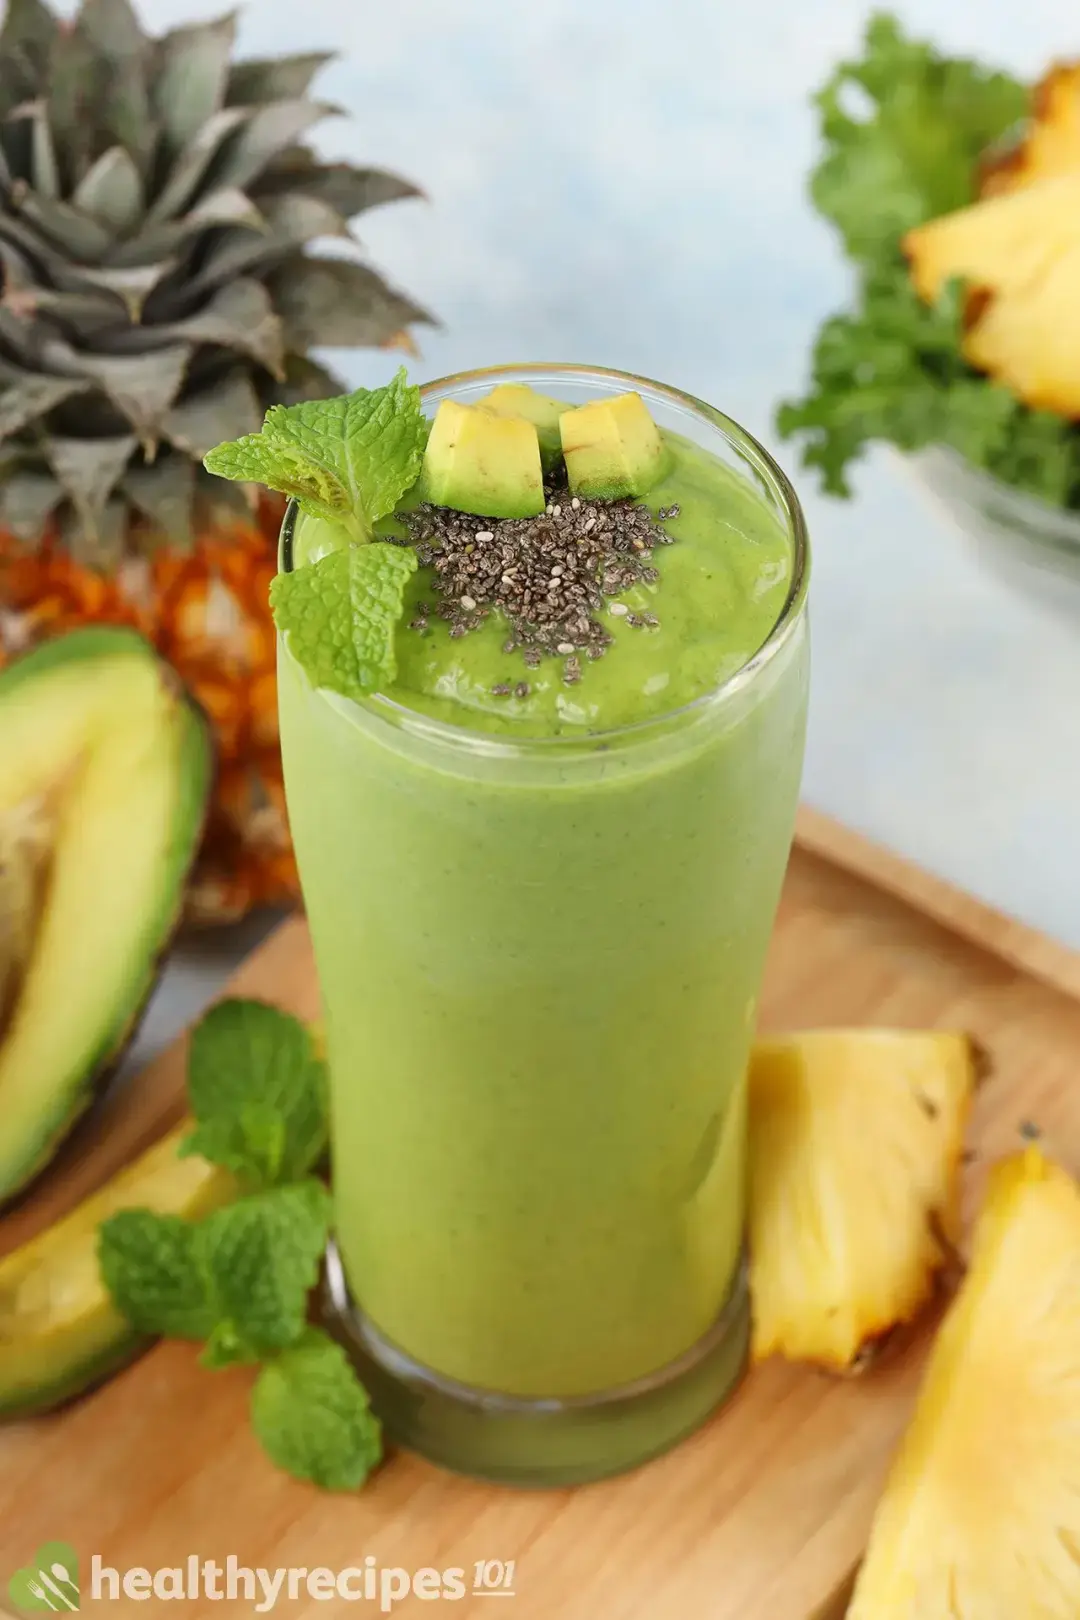 a glass of avocado green smoothie on a wooden board with pineapple wedges and avocado slices